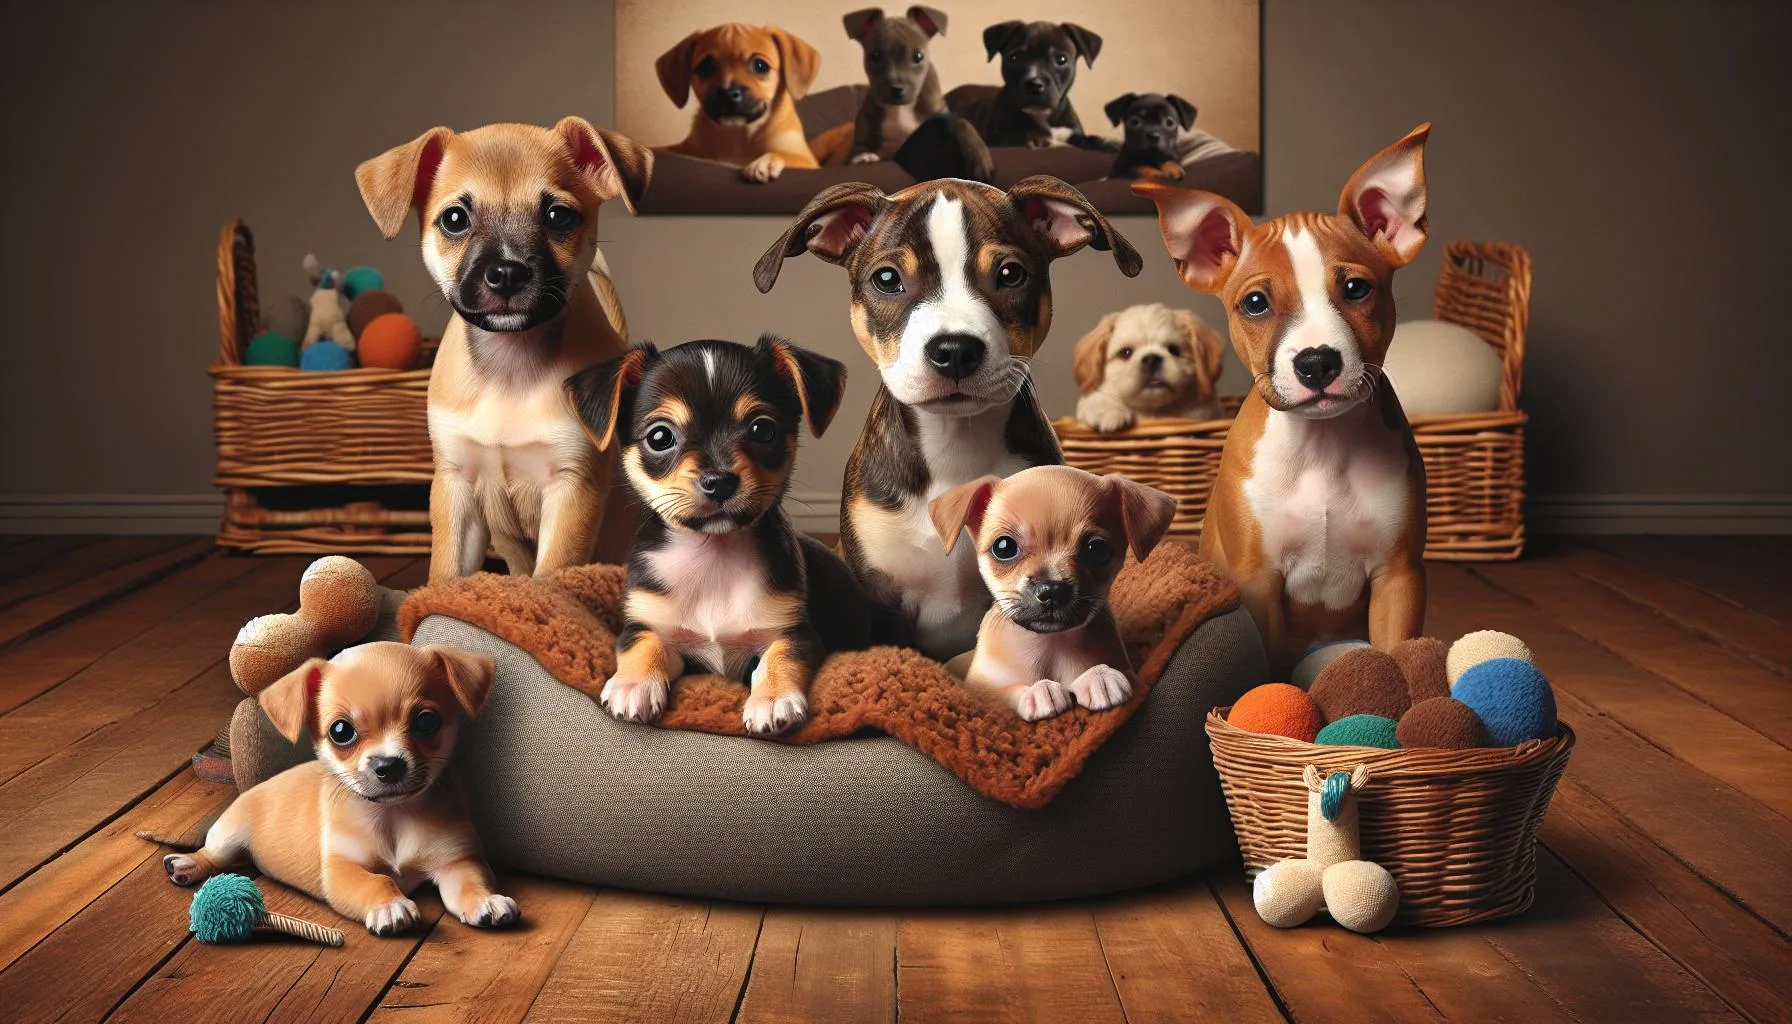 Pitbull and Chihuahua Mix Puppies: Adopt Now!